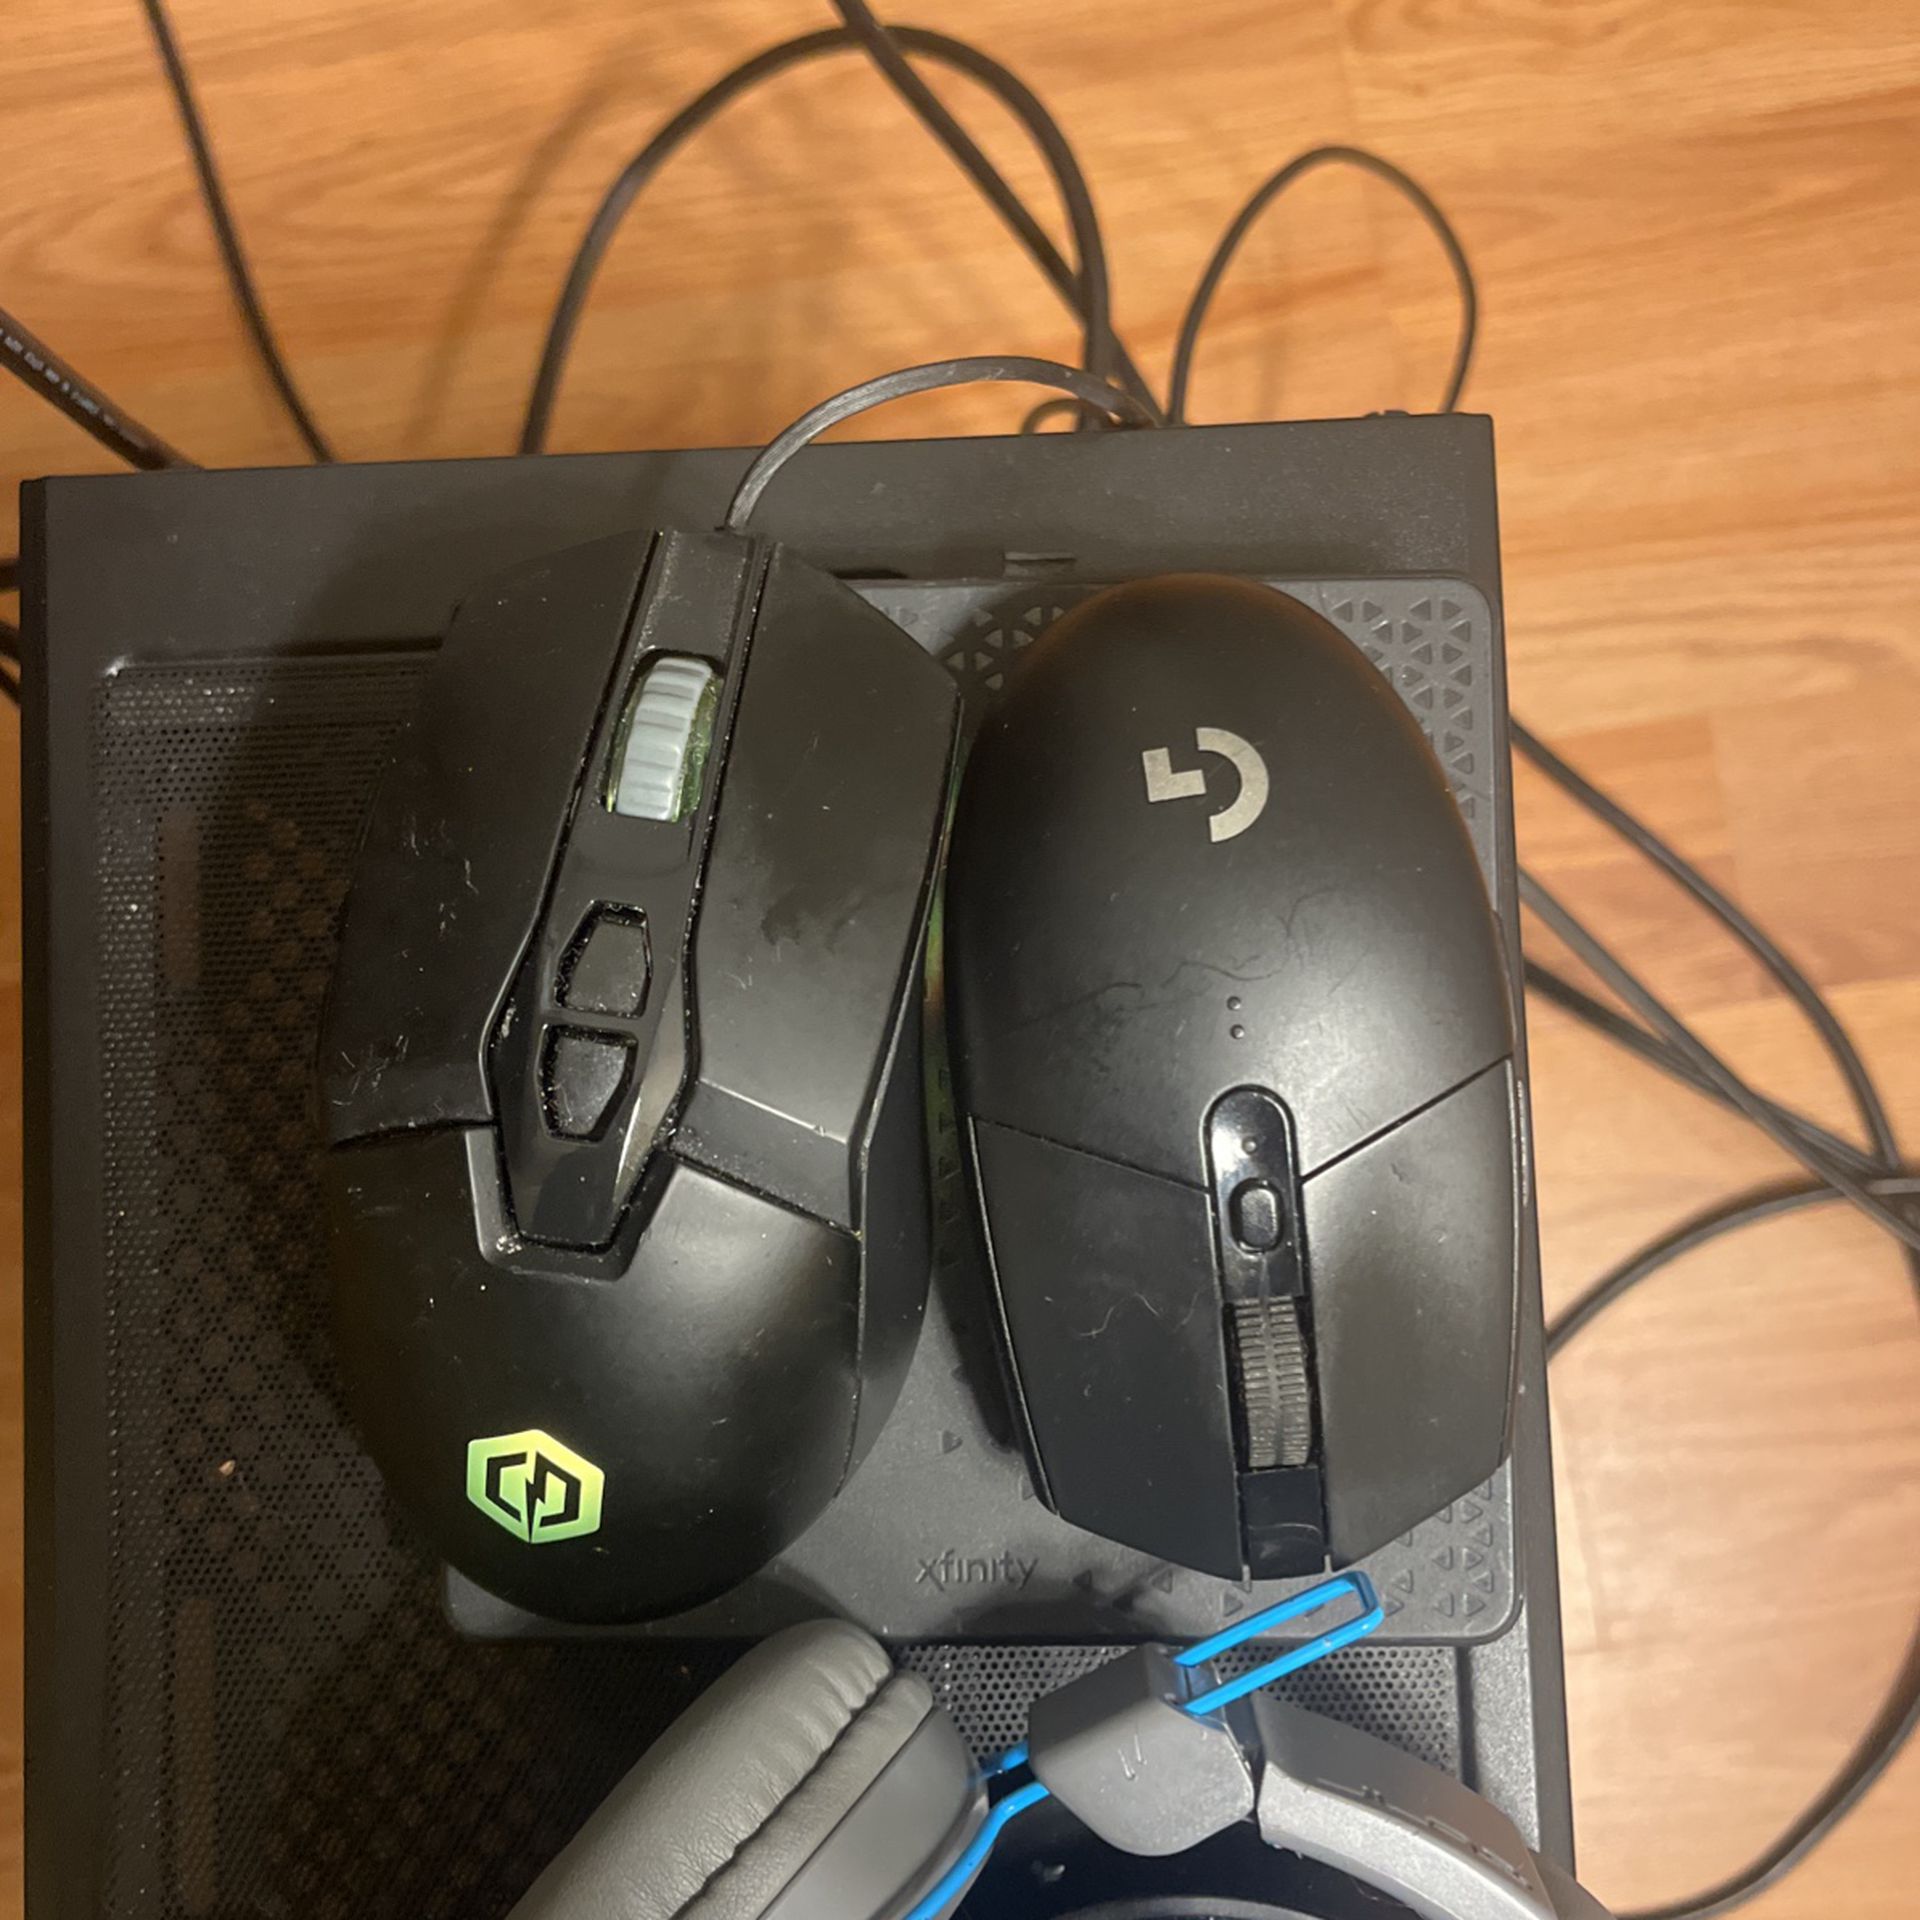 Two Mouse’s 